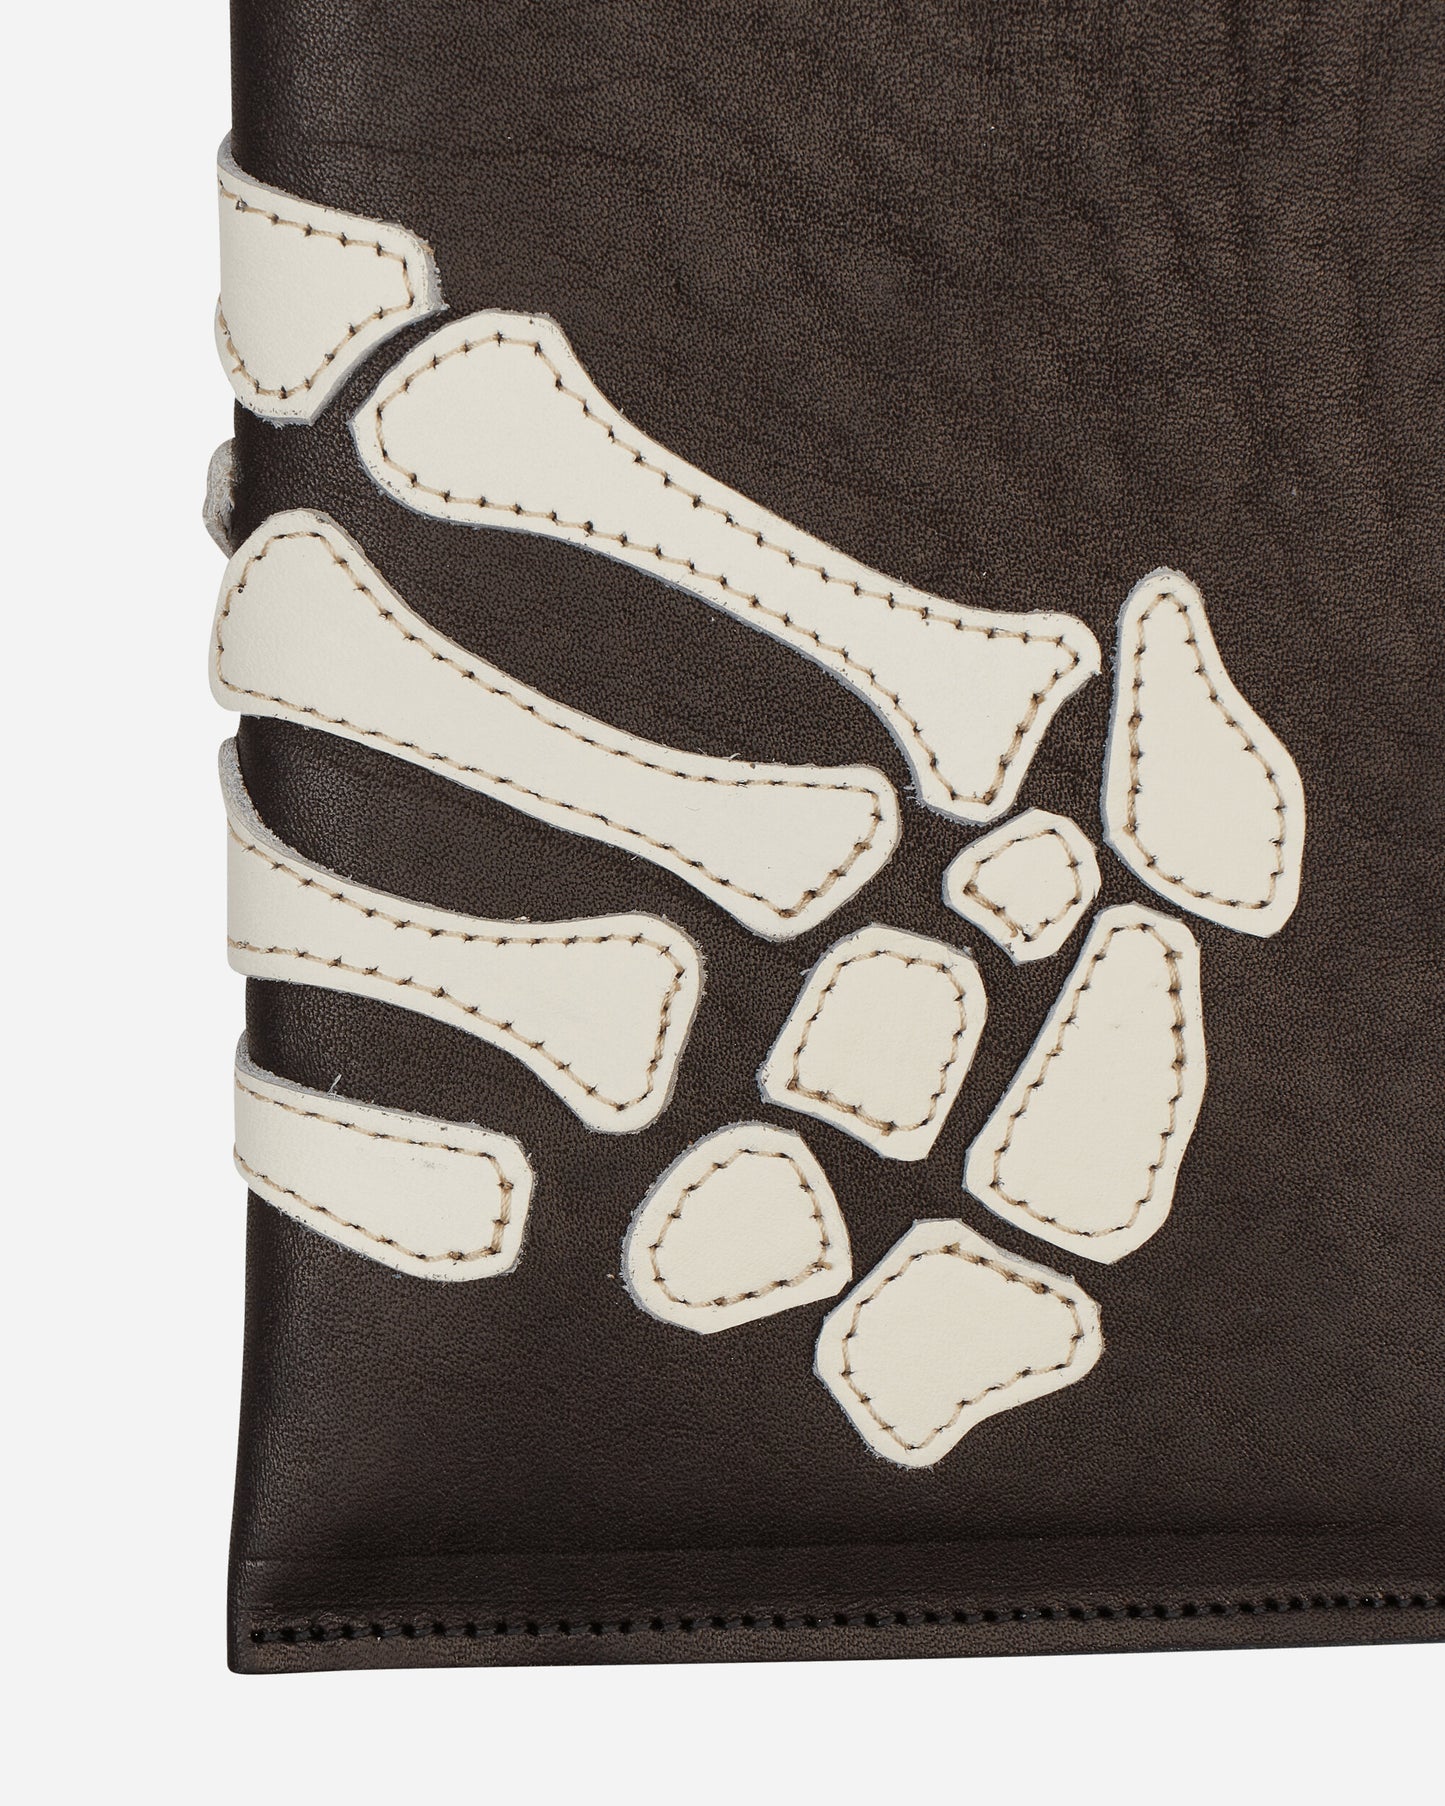 KAPITAL Leather Thumbs-Up Bone Hand Zip Neck Pouch Black Wallets and Cardholders Zip Wallets K2310XG534 1